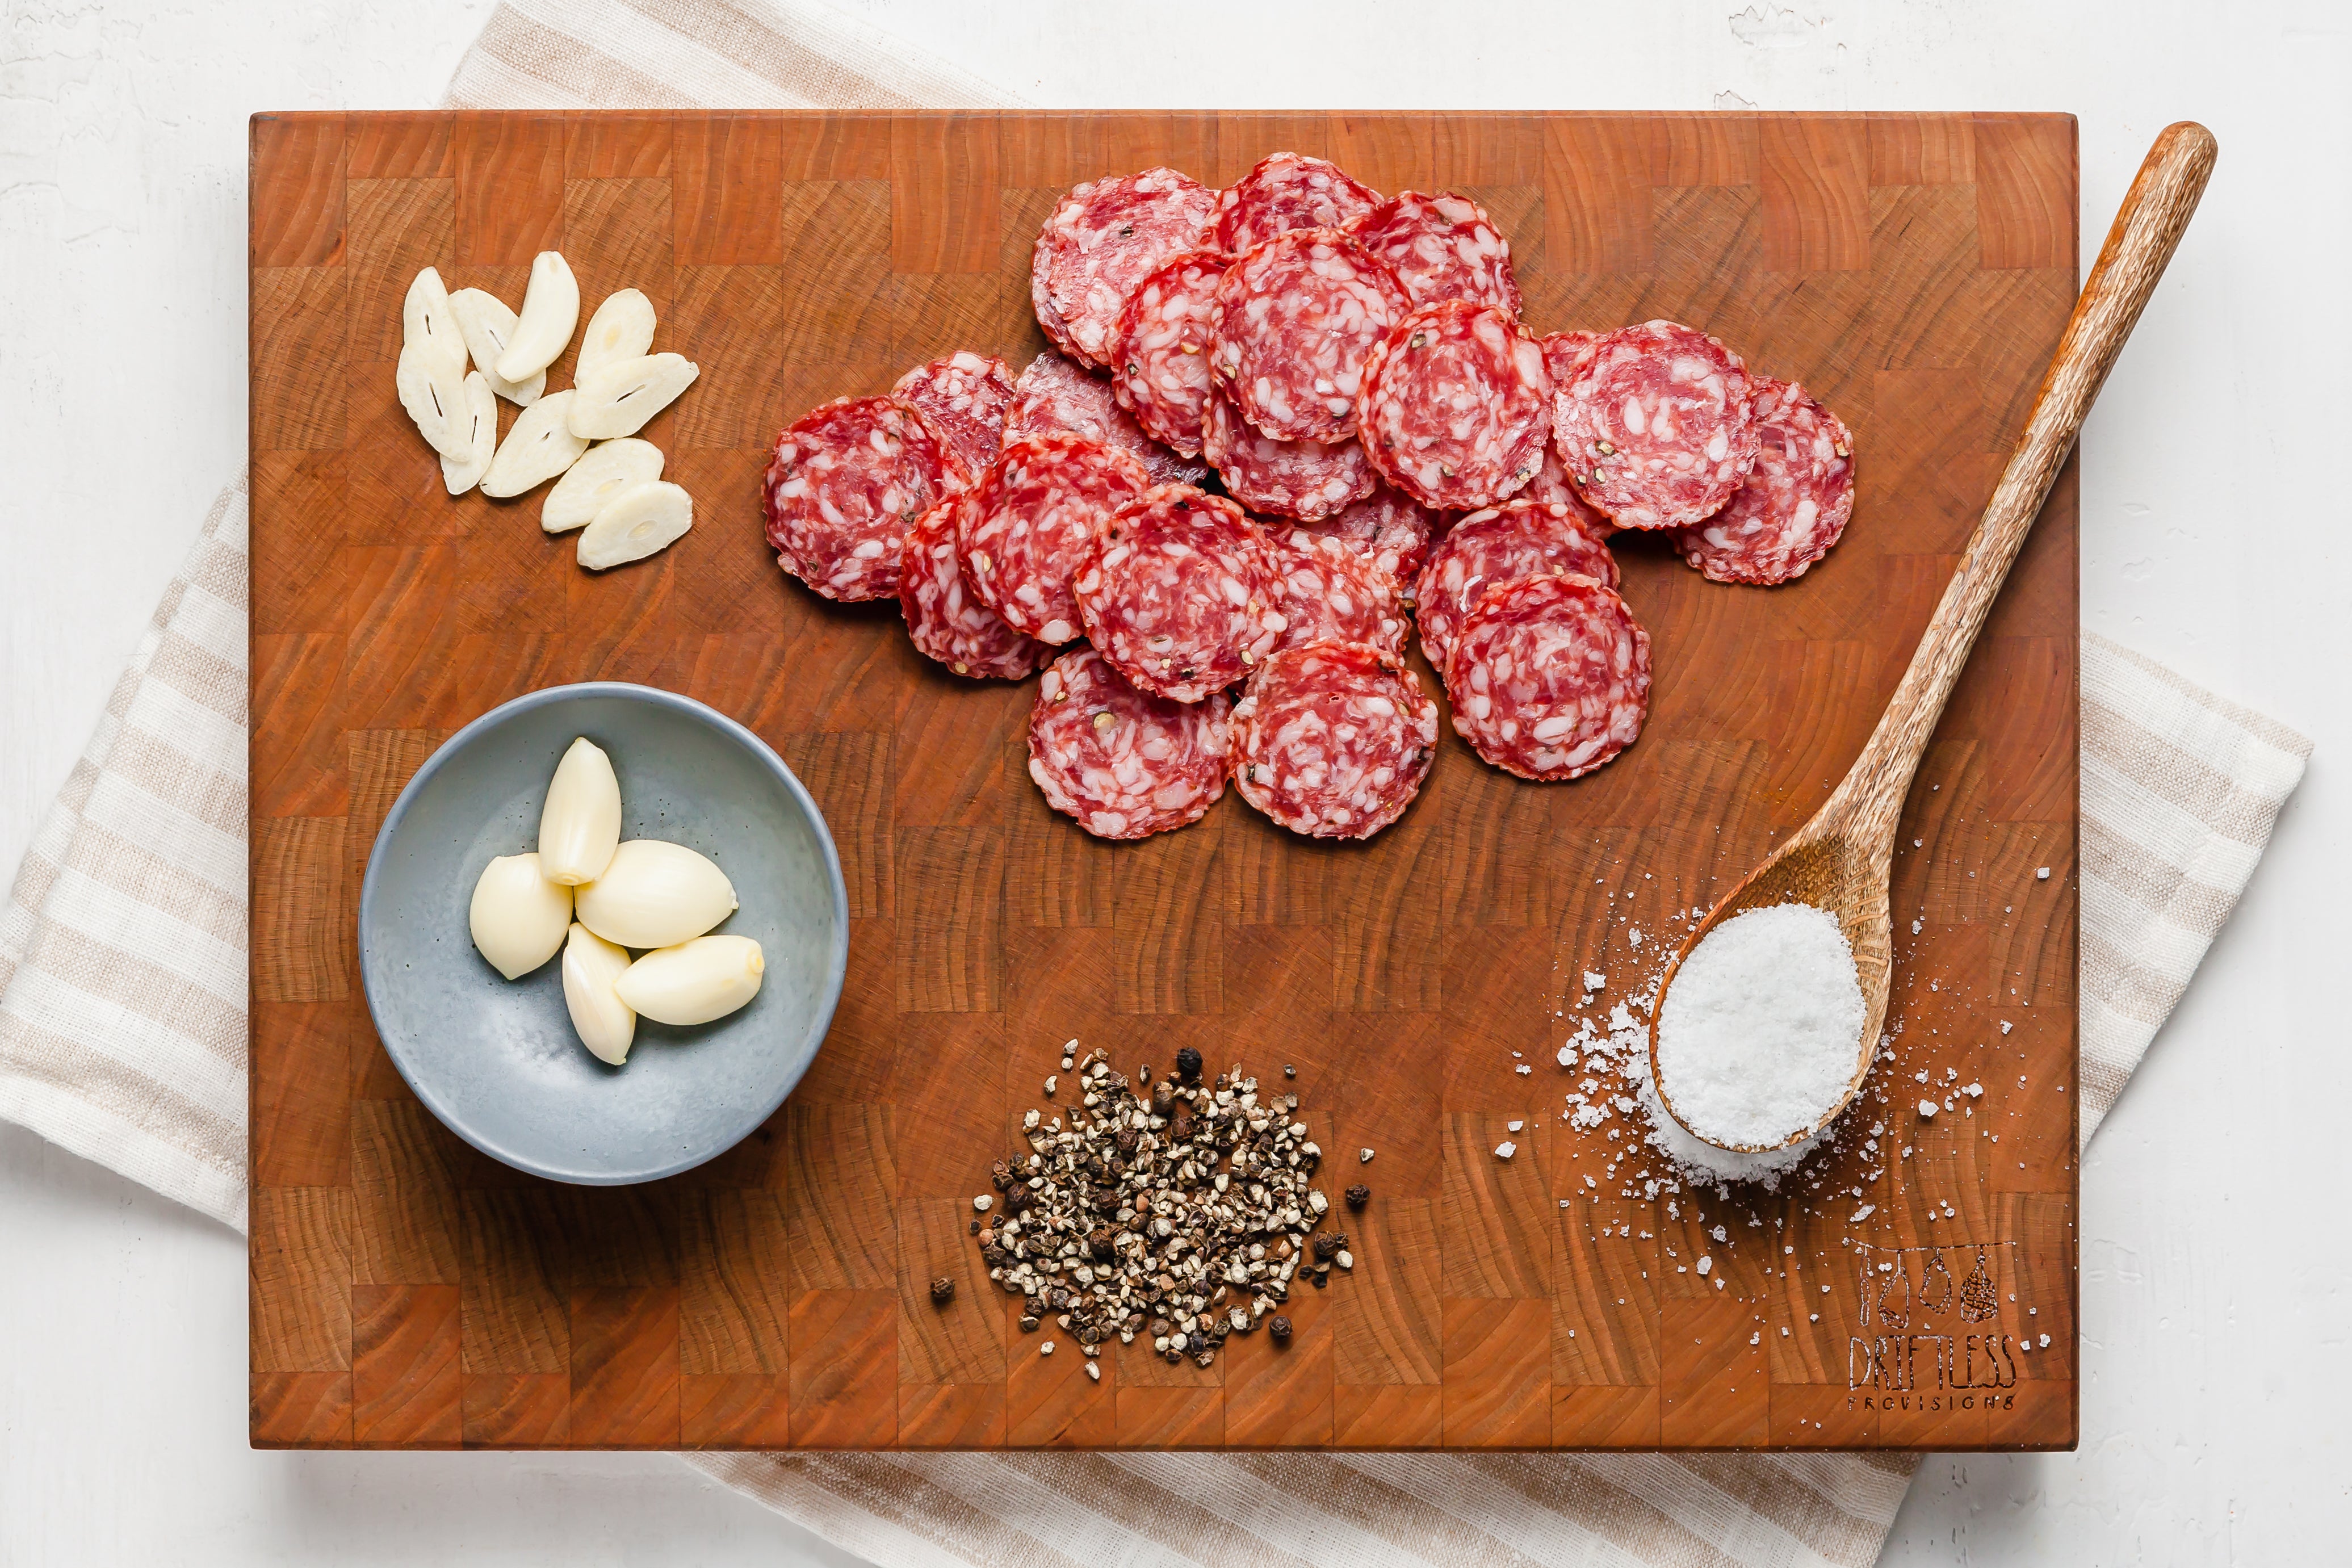 Saucisson Sec Handcrafted, Old World Charcuterie – Driftless Provisions